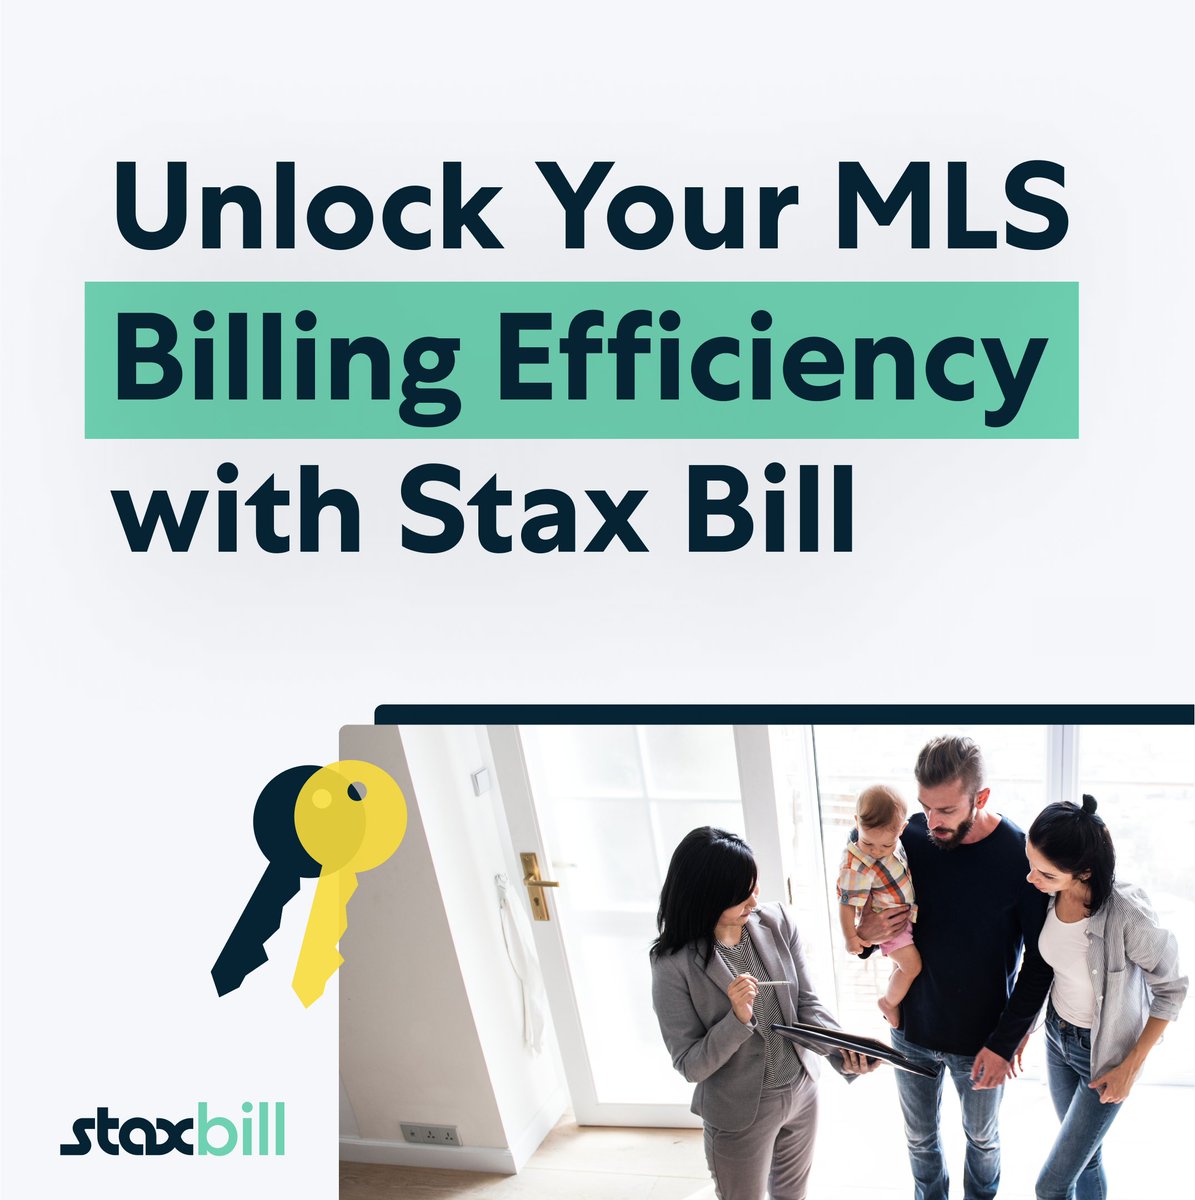 Are you looking to transform your MLS billing process and supercharge ⚡ your revenue retention? Check out what Stax Bill can do for your #MLS business. → bit.ly/47Swqmr #multiplelistingservice #realestatetech #realtor #realestate #revenueretention